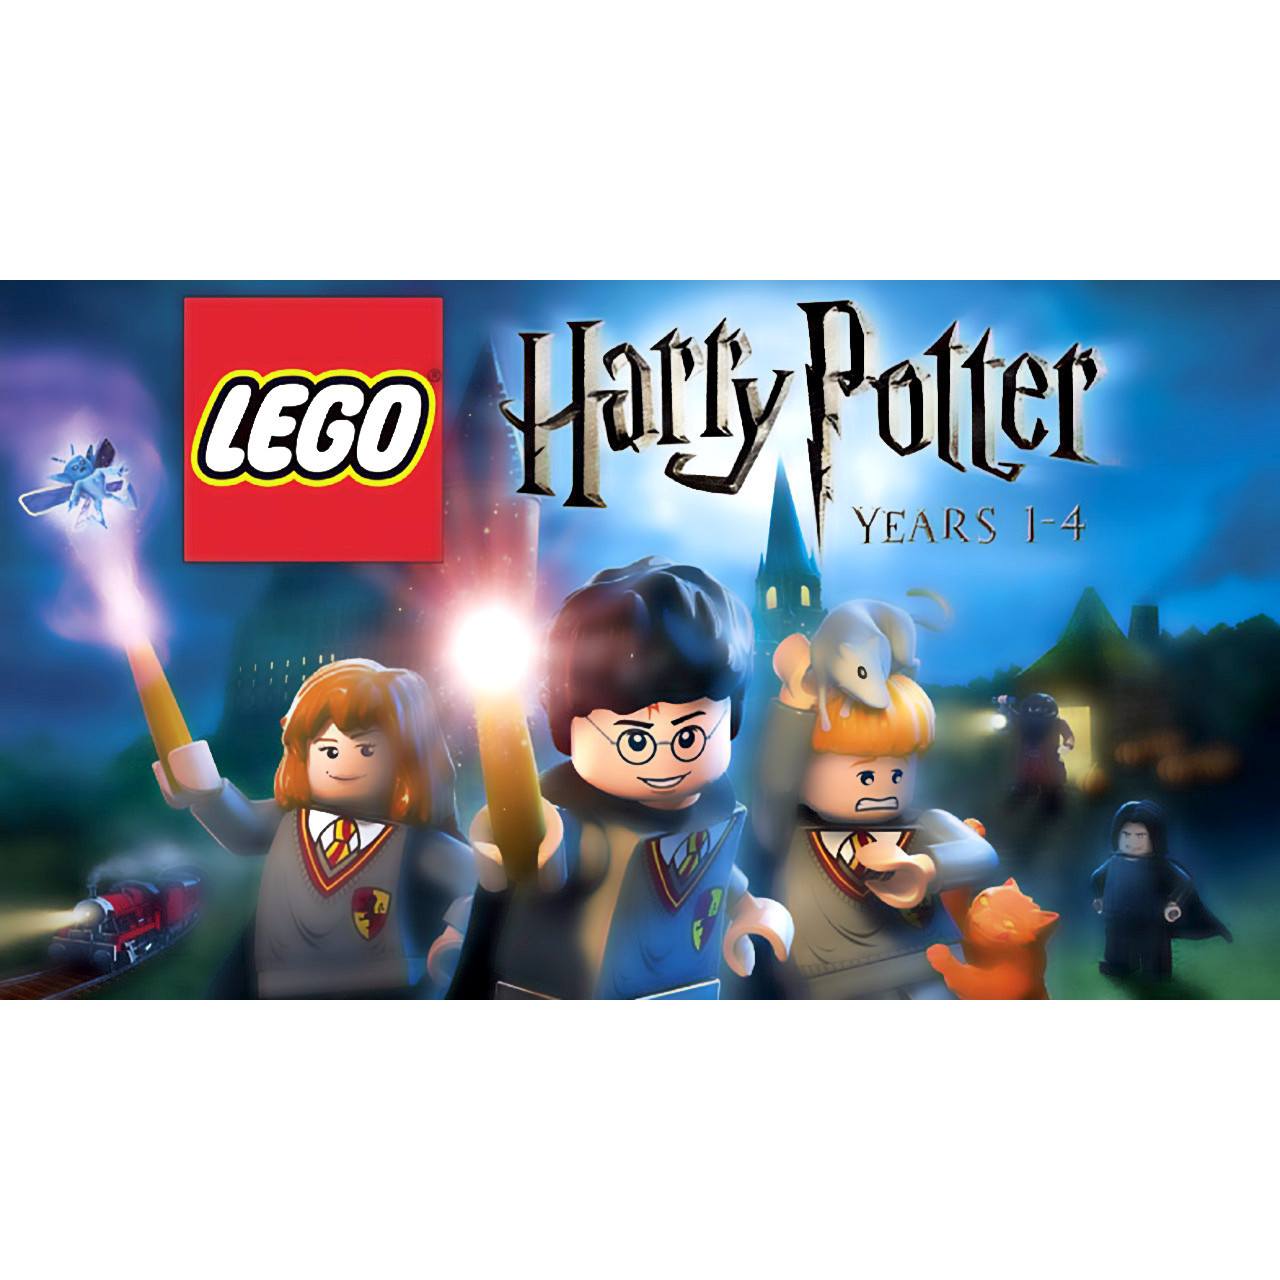 lego-harry-potter-years-1-4-nintendo-ds-game-pj-s-games